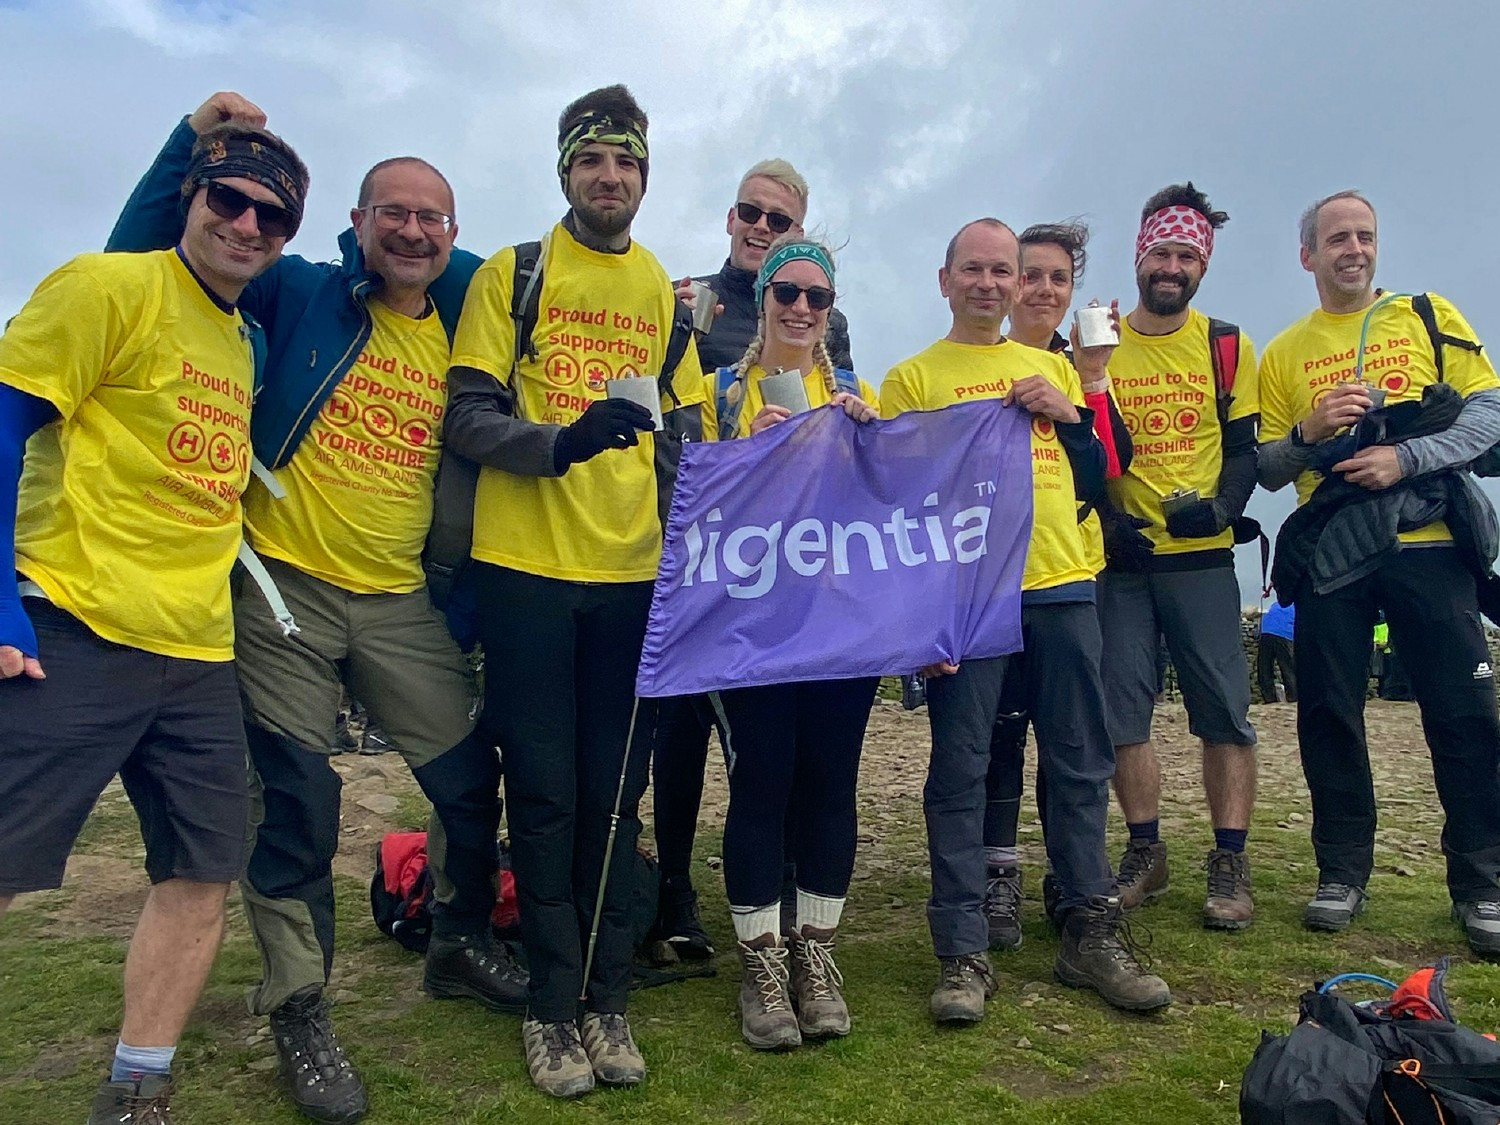 Ligentia UK team complete Yorkshire Three Peaks for Yorkshire Air Ambulance in memory of our colleague Adrian Hartman